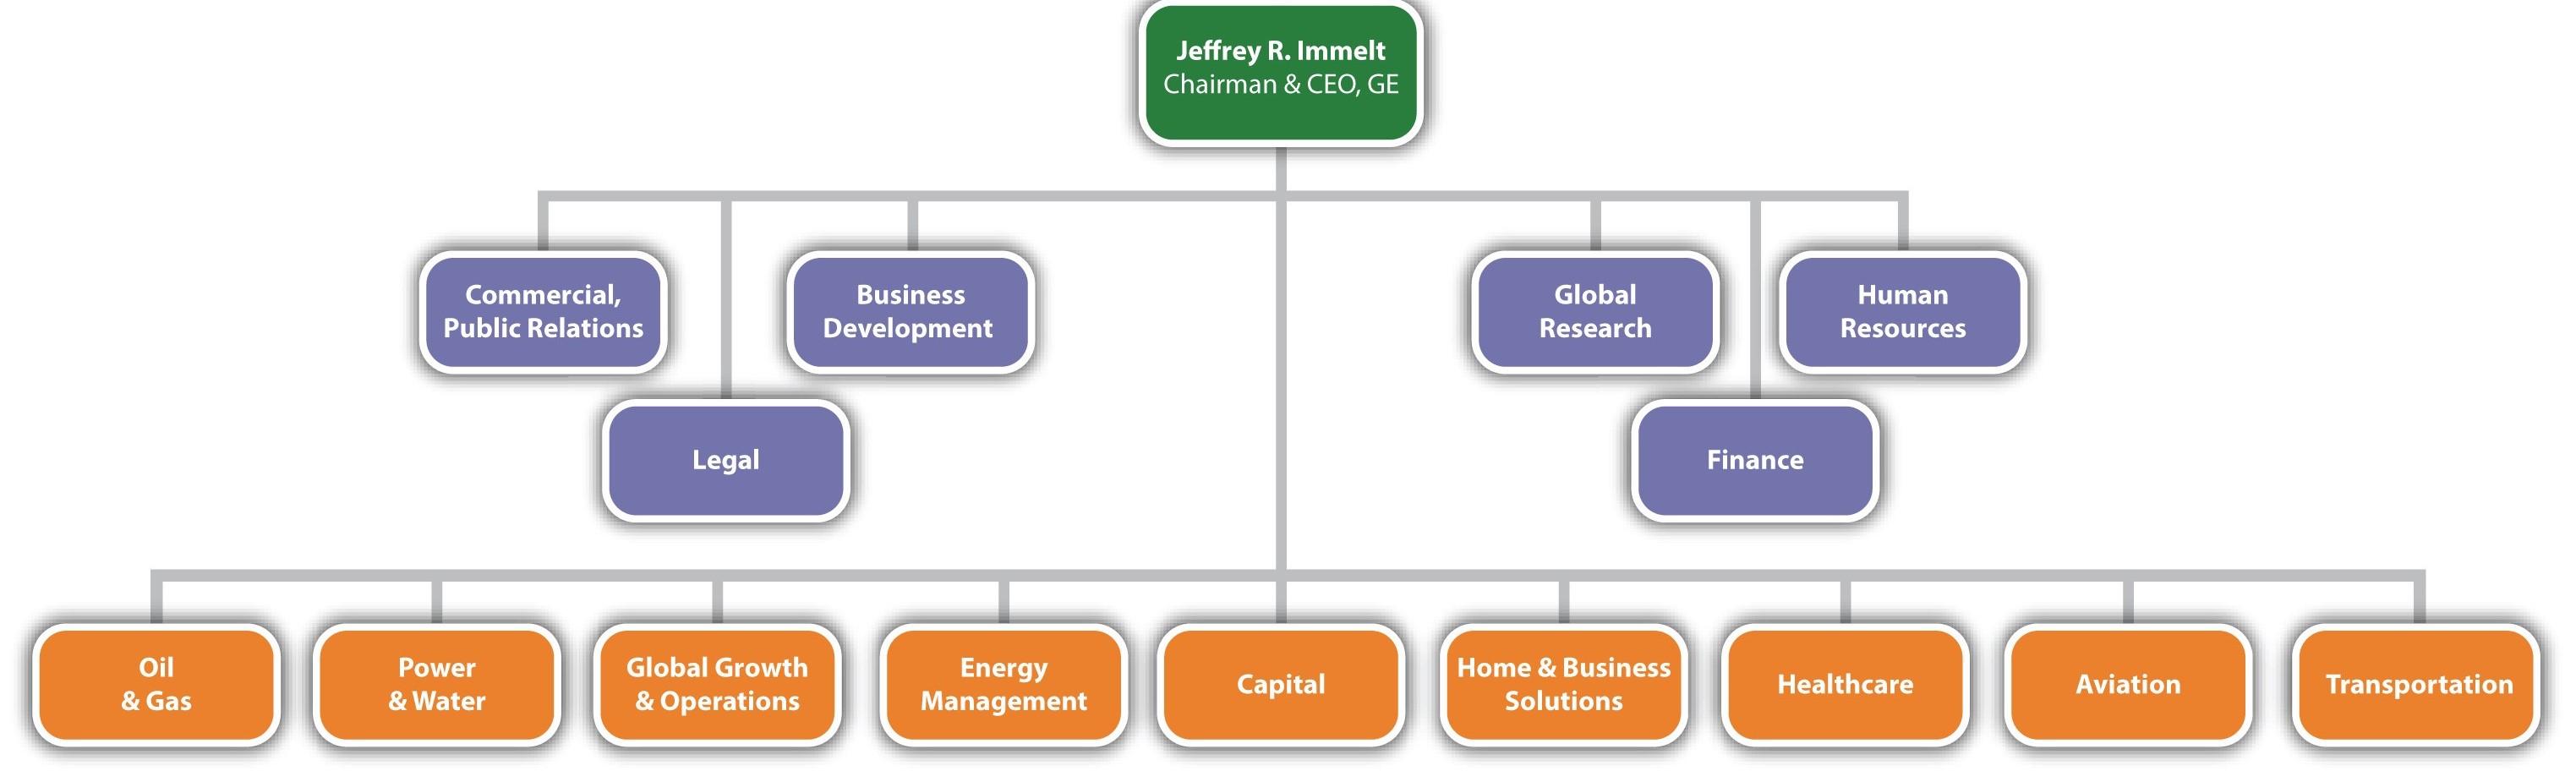 Ge Healthcare Org Chart